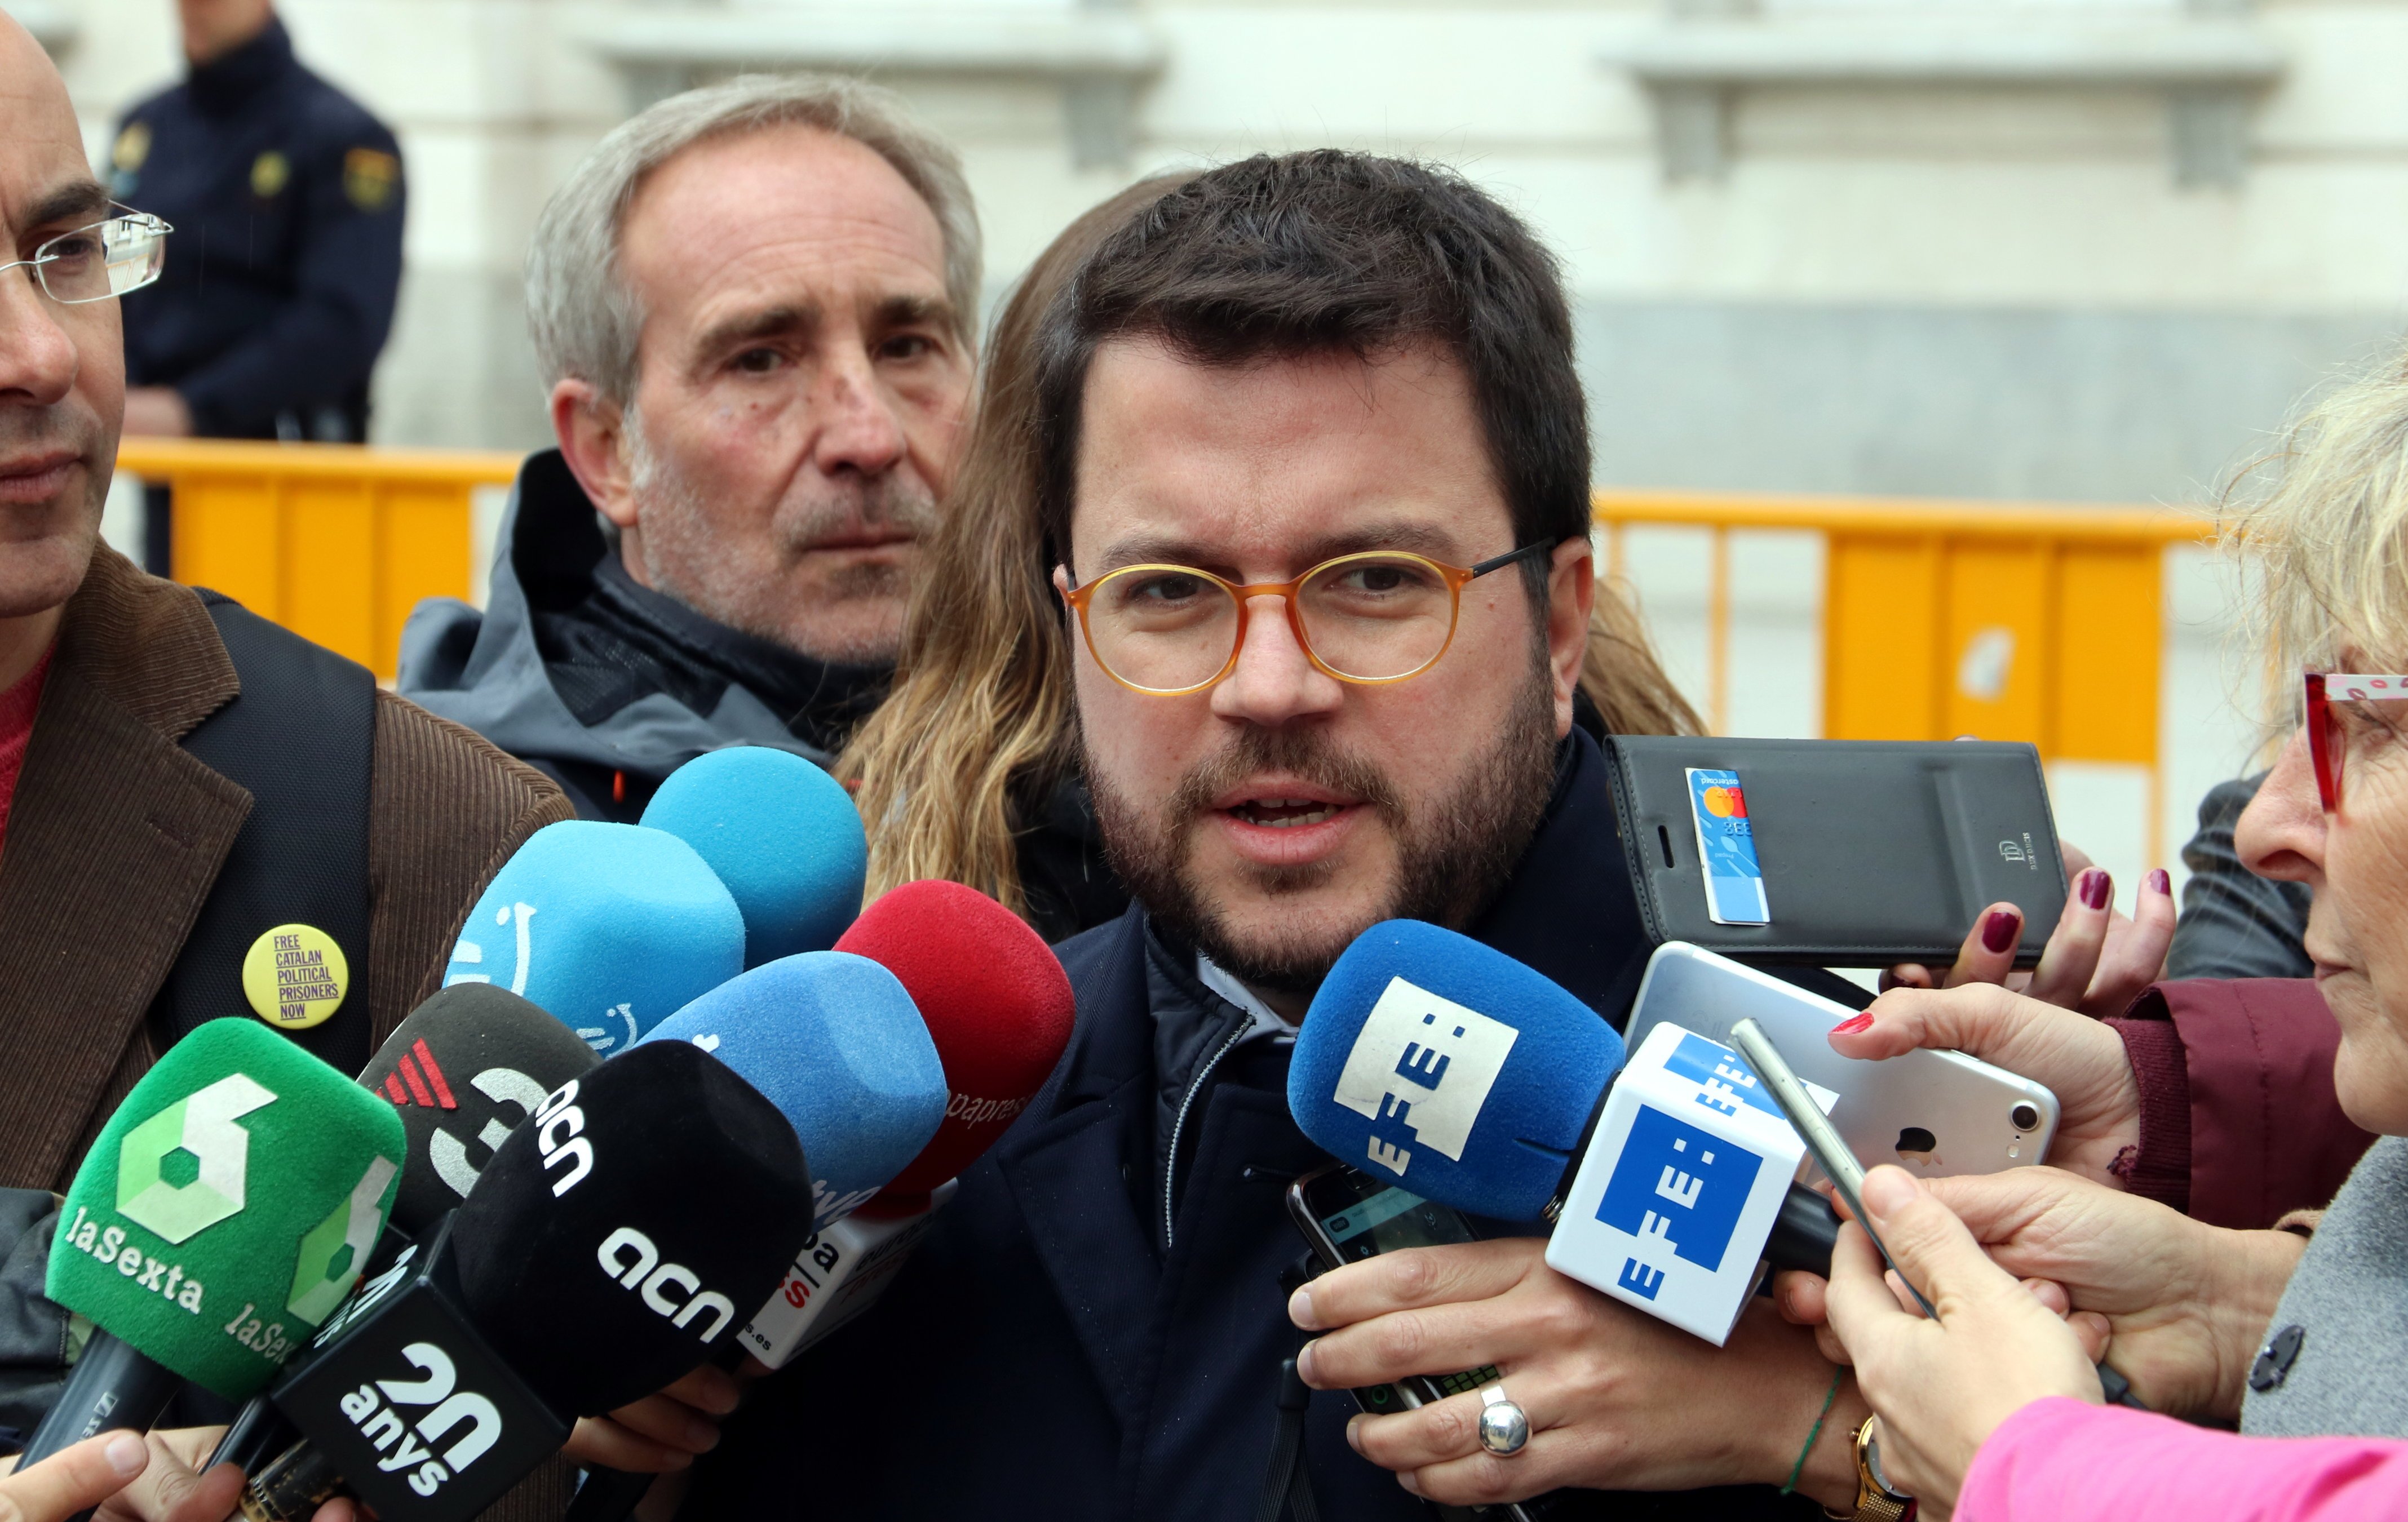 Aragonès asks for PSOE "gestures", with Catalan votes holding key to Senate plan